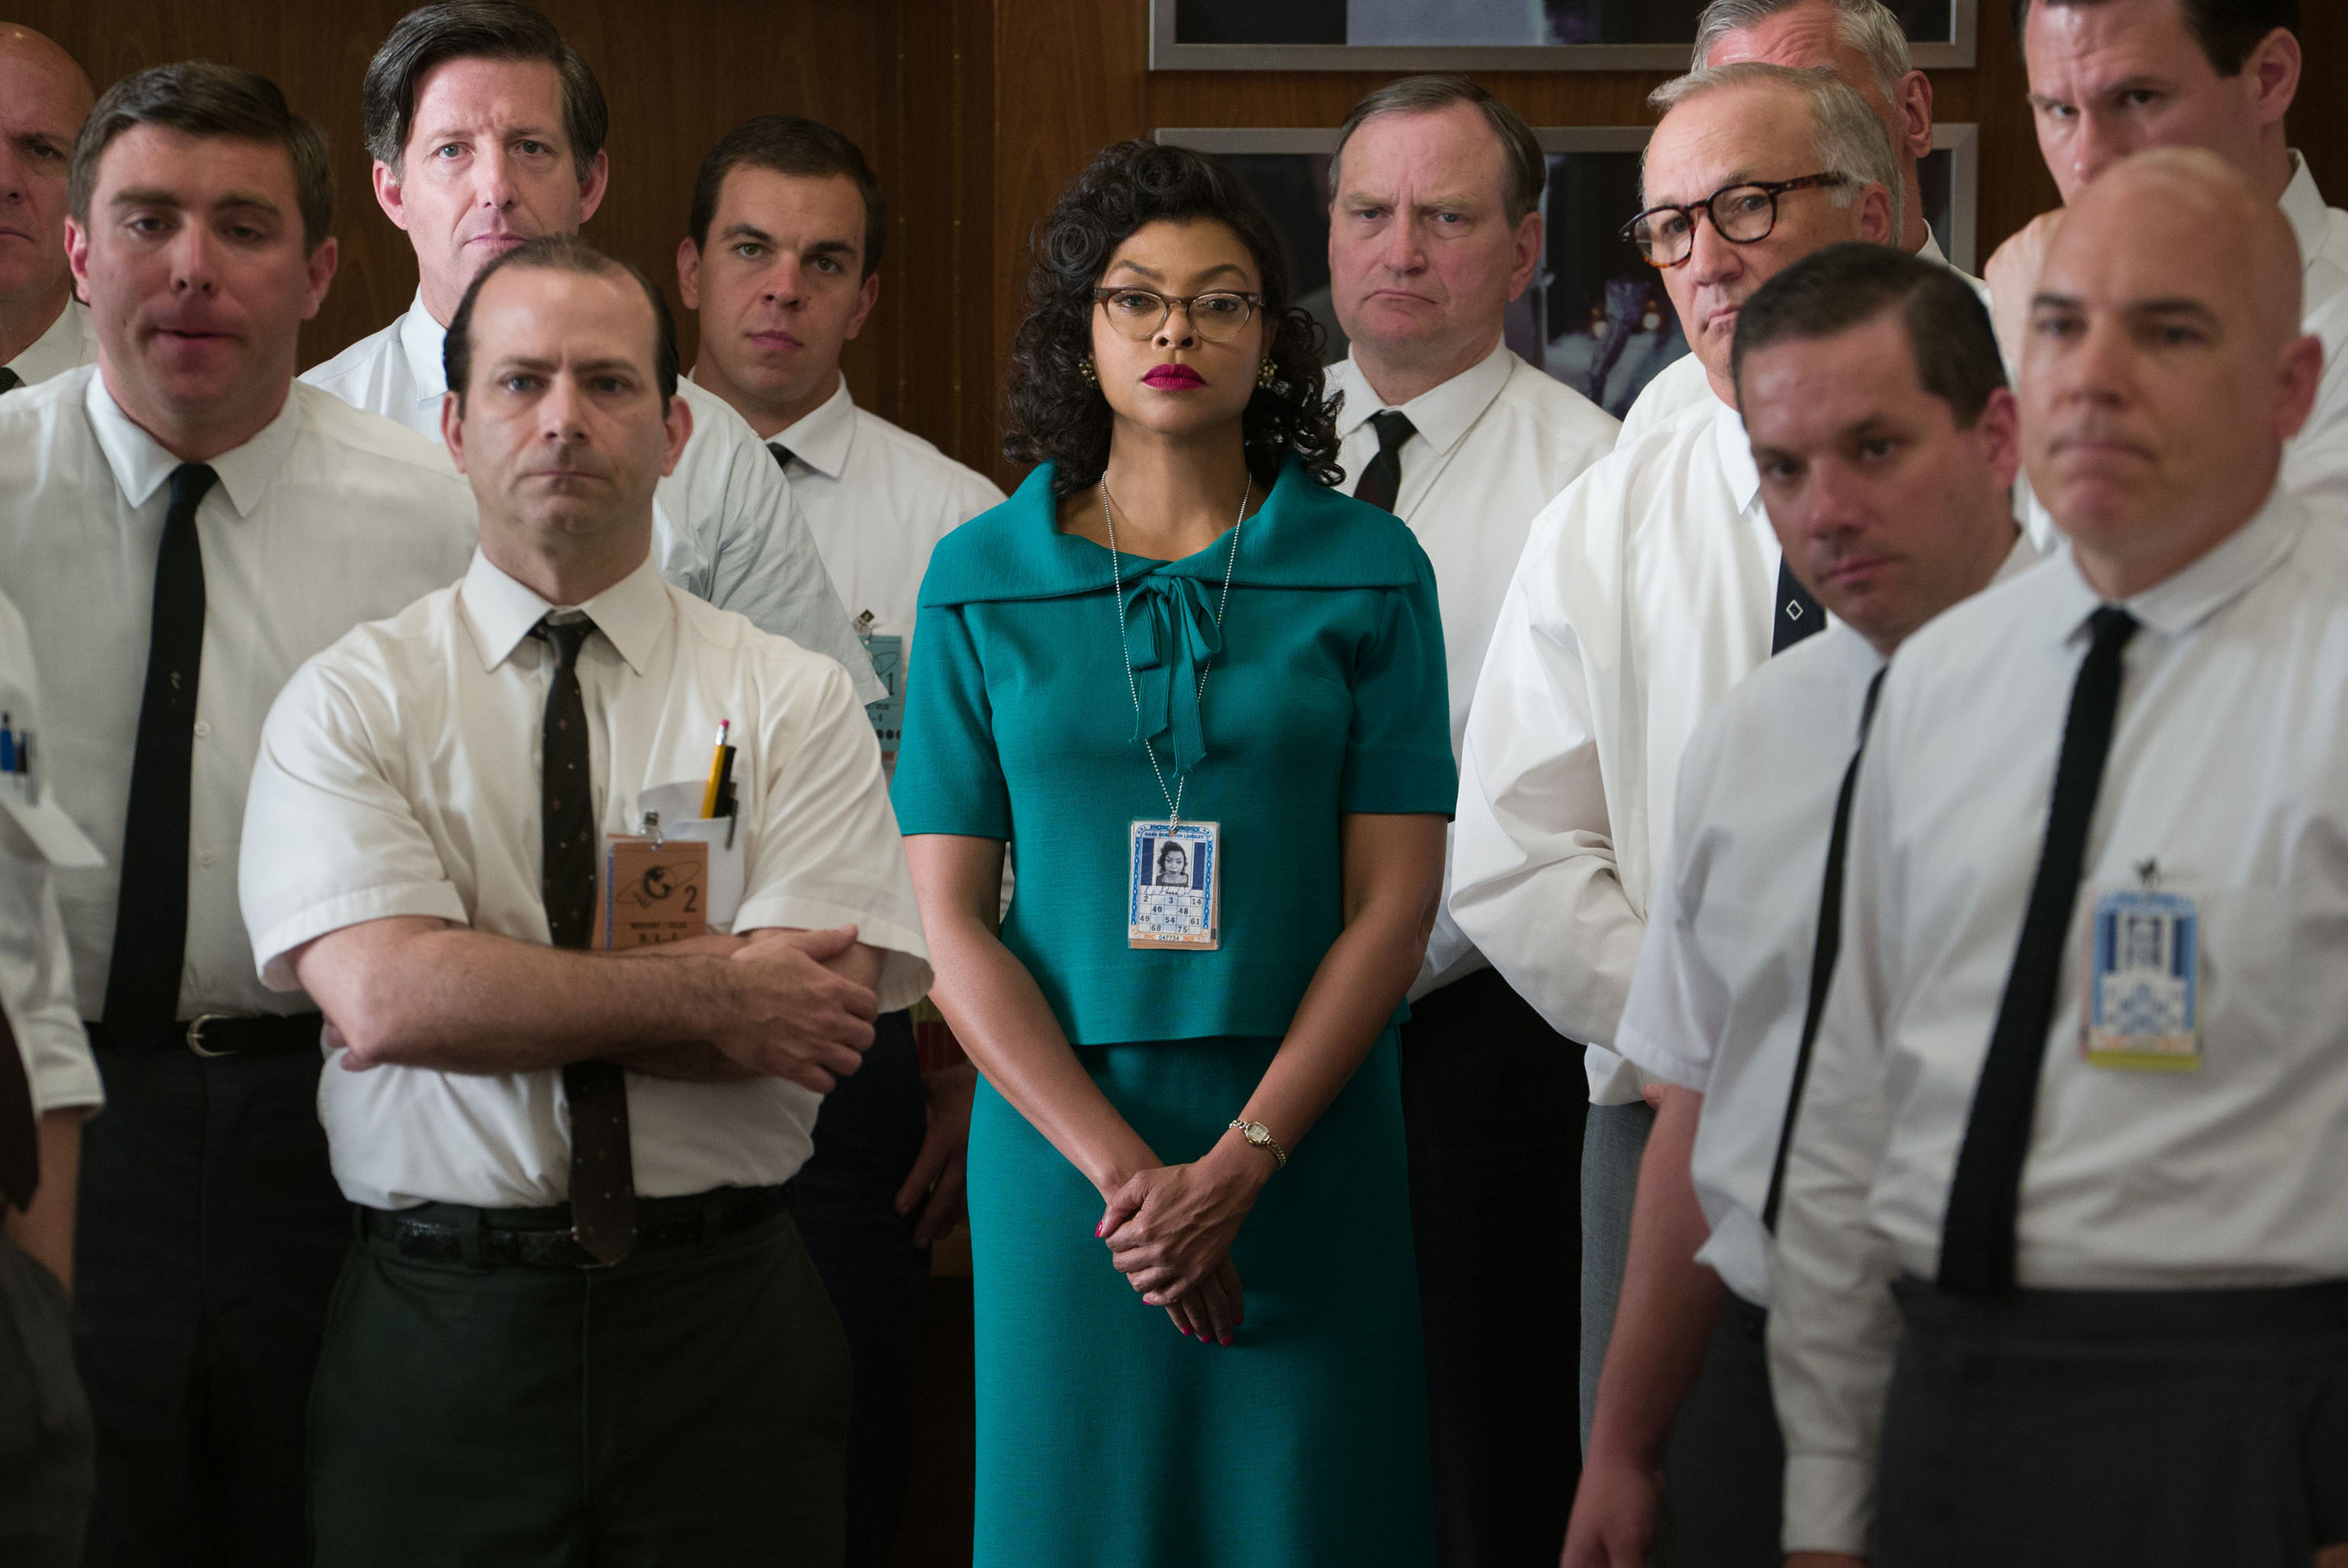 Katherine Johnson, a Black woman, standing amongst a group of white, male colleagues